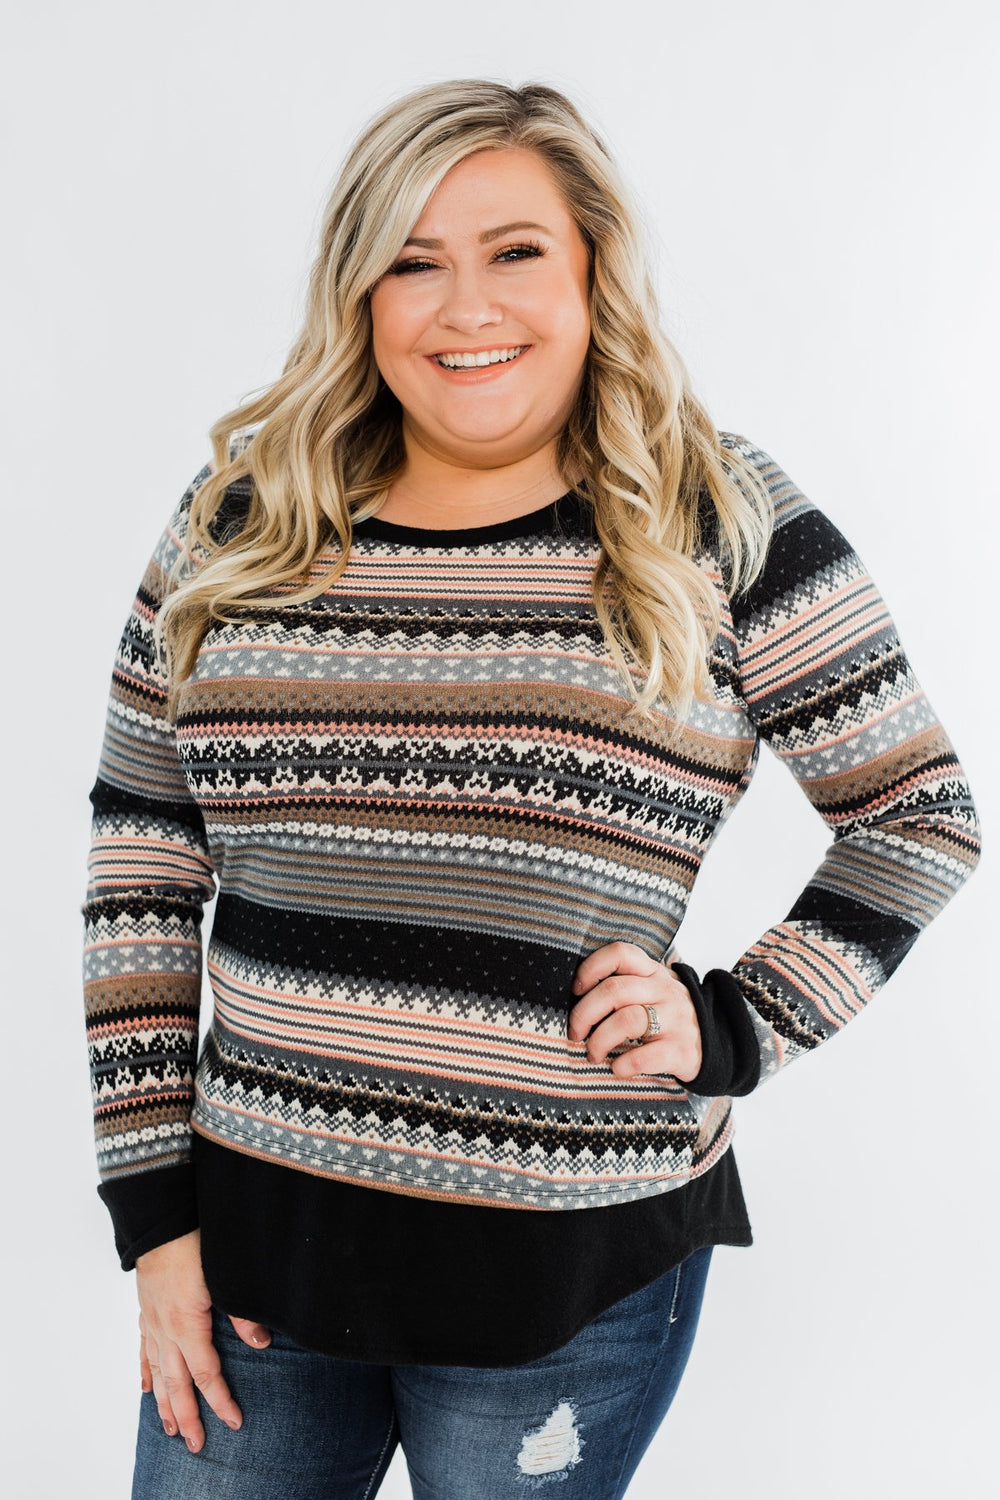 Simply Beautiful Pullover Top- Black & Pink – The Pulse Boutique